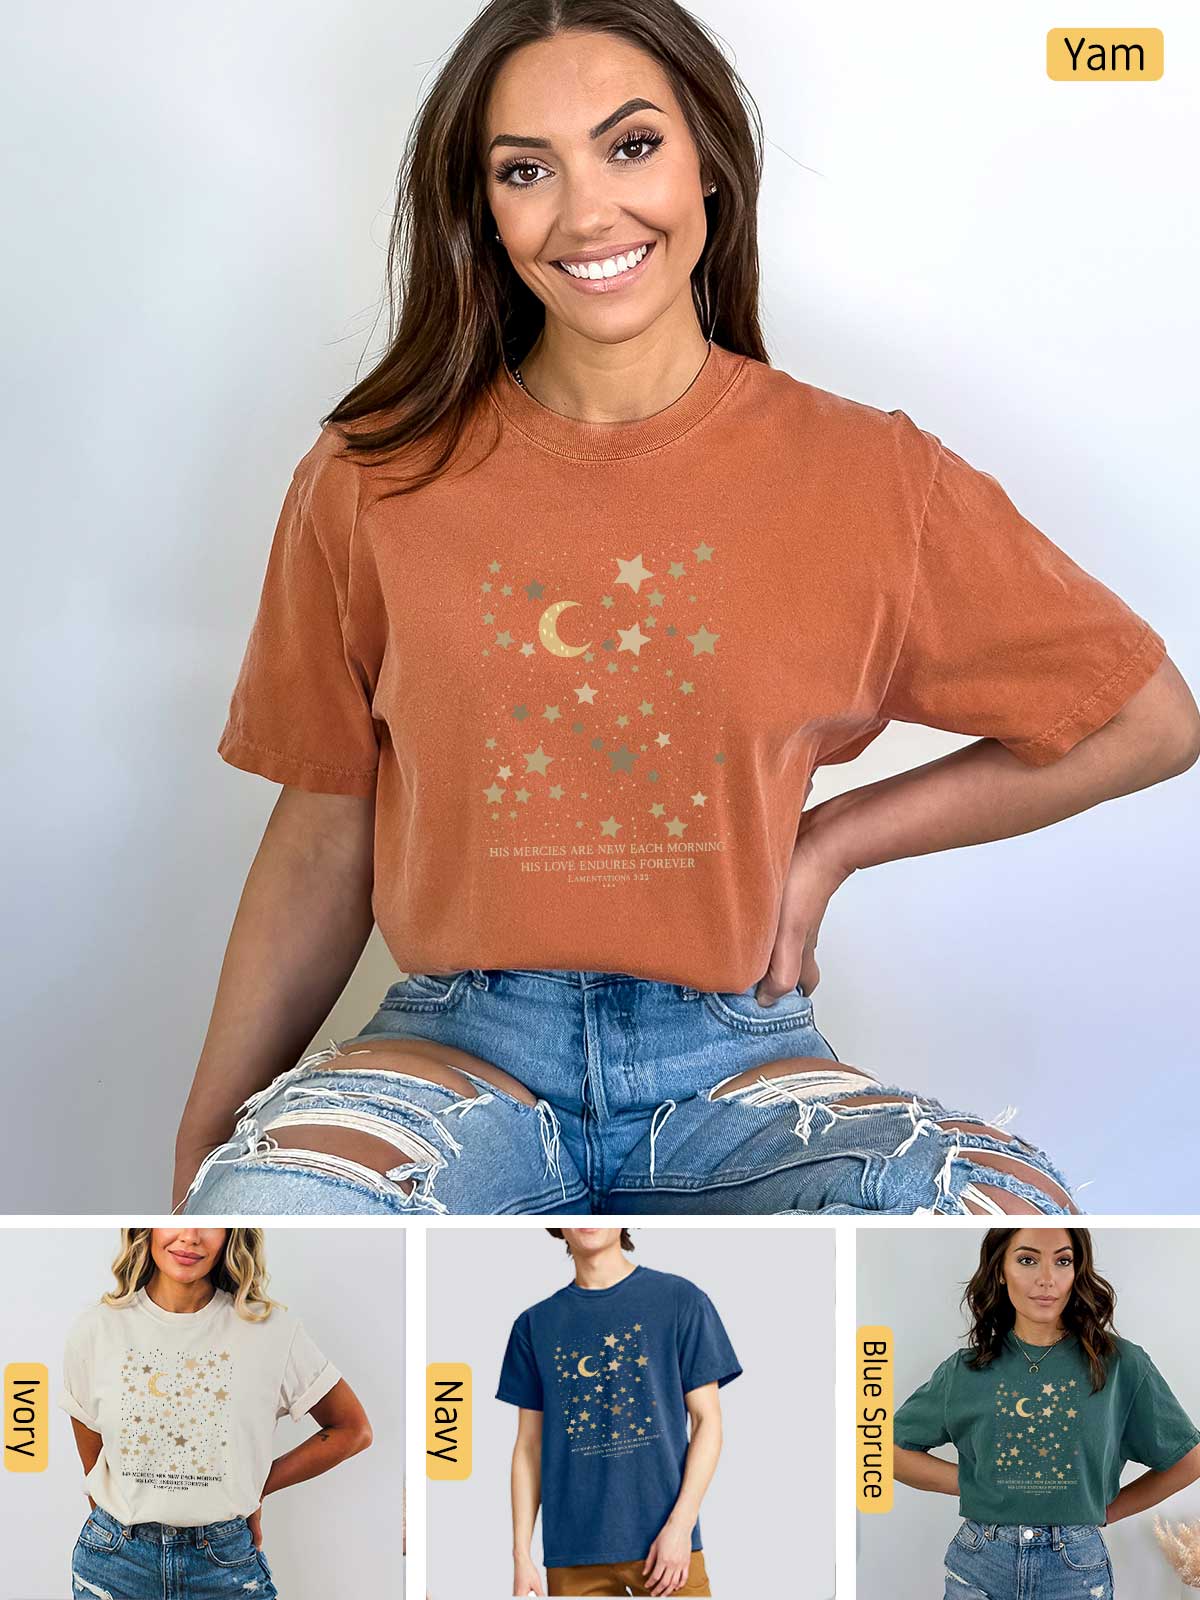 a woman wearing a t - shirt with stars and a moon on it